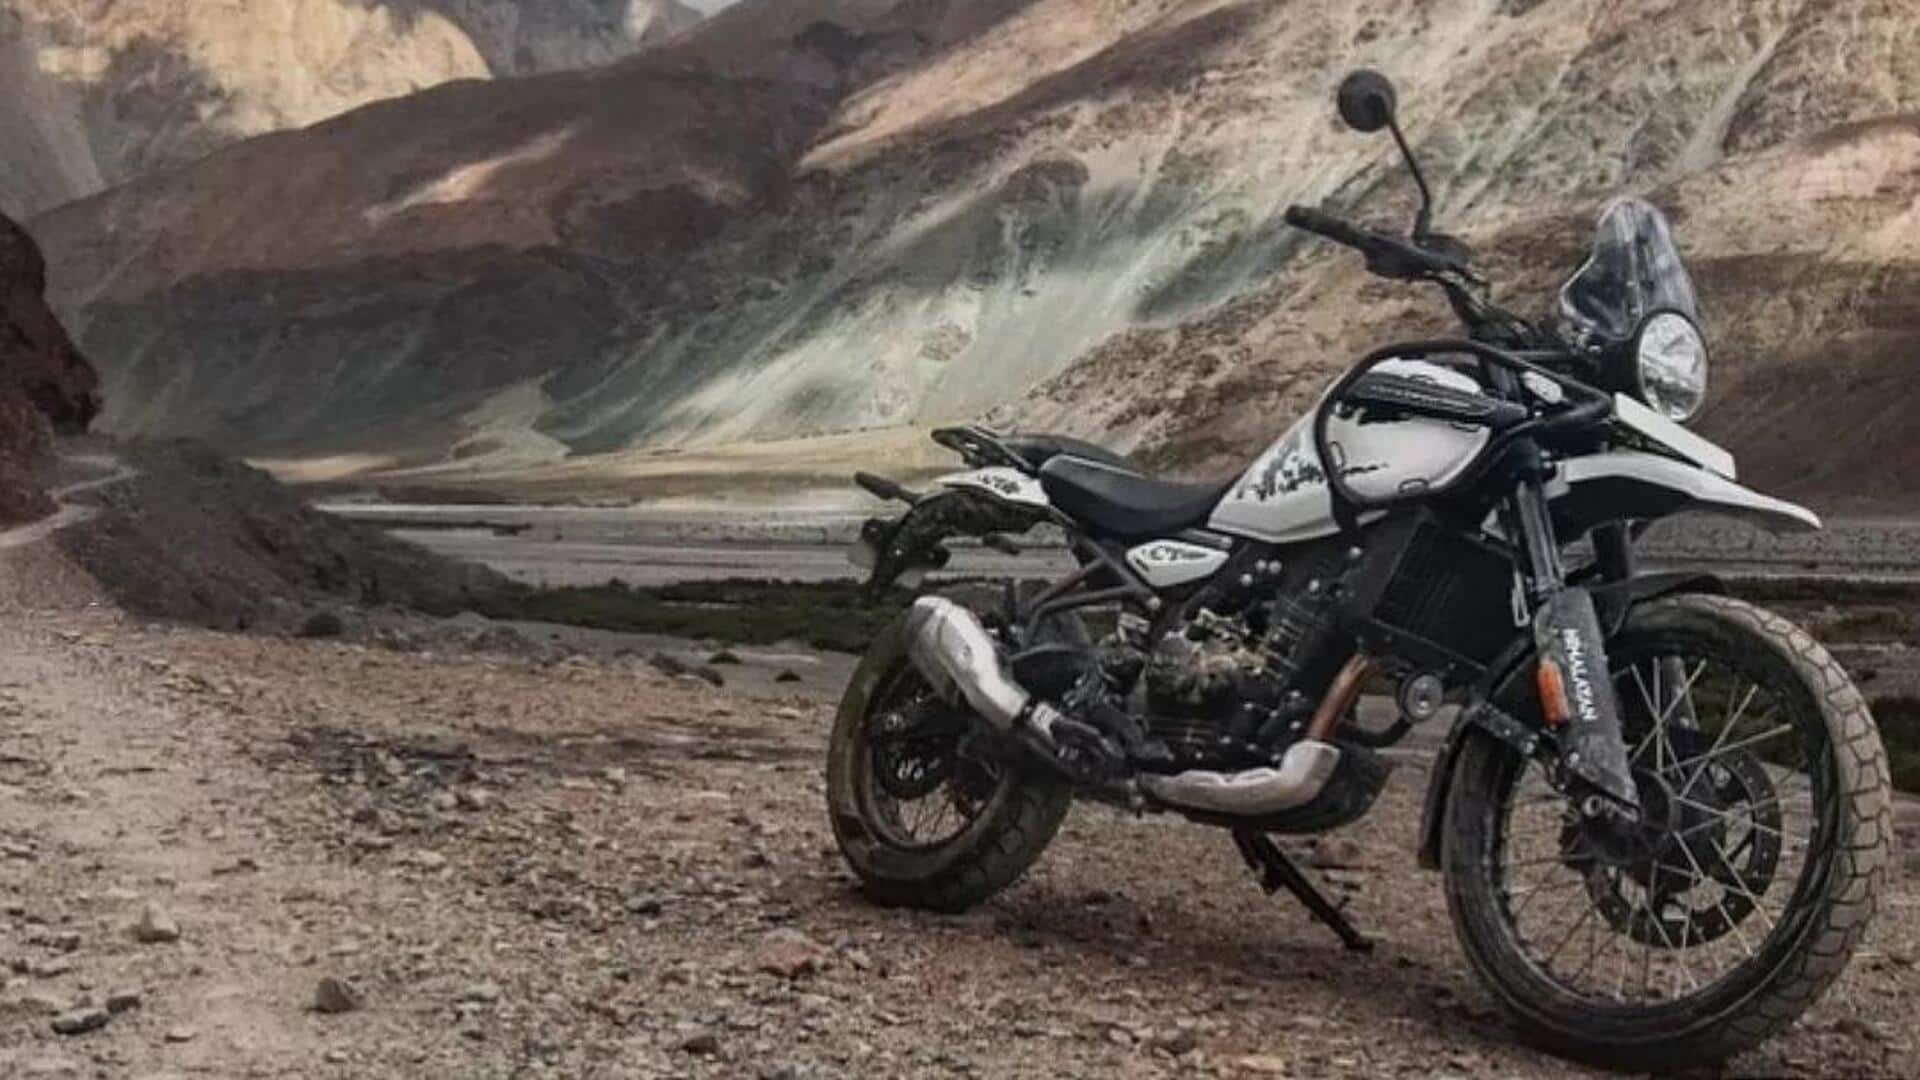 Royal Enfield Himalayan 452 to come in 4 dual-tone shades